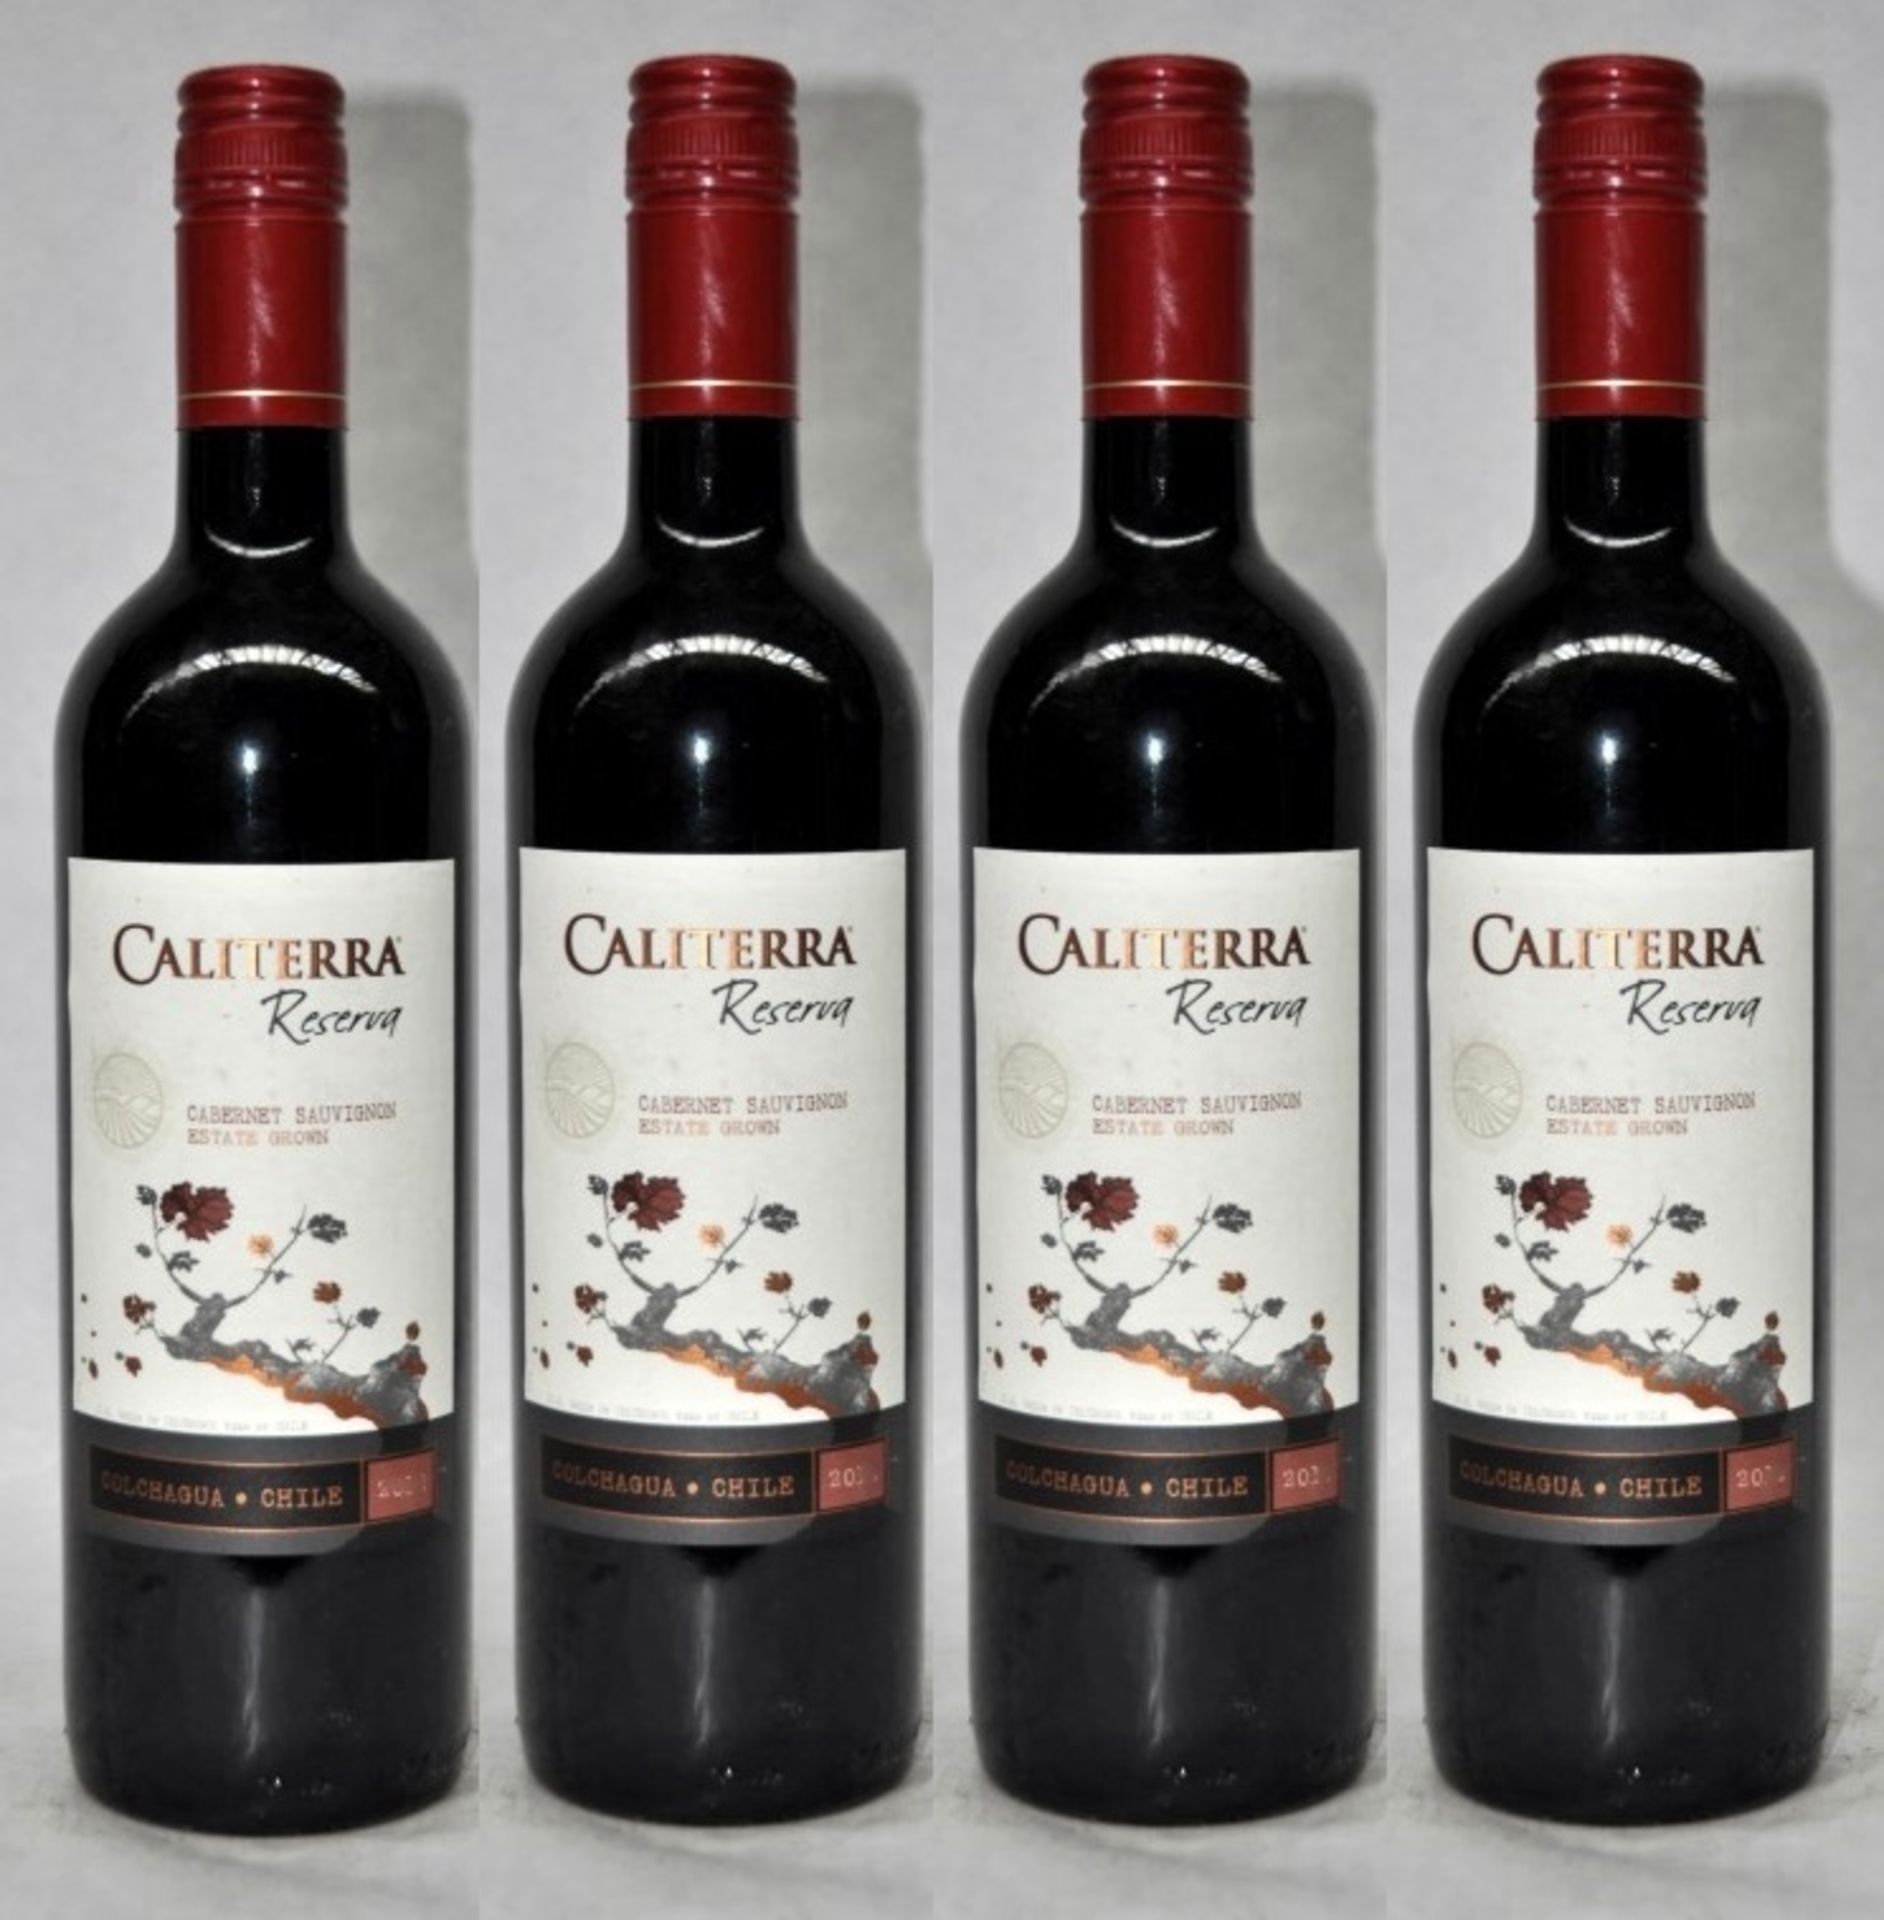 4 x Caliterra Reserva Sauvignon Estate Grown Red Wines - Chile - Years 2010/2011 - Bottle Size